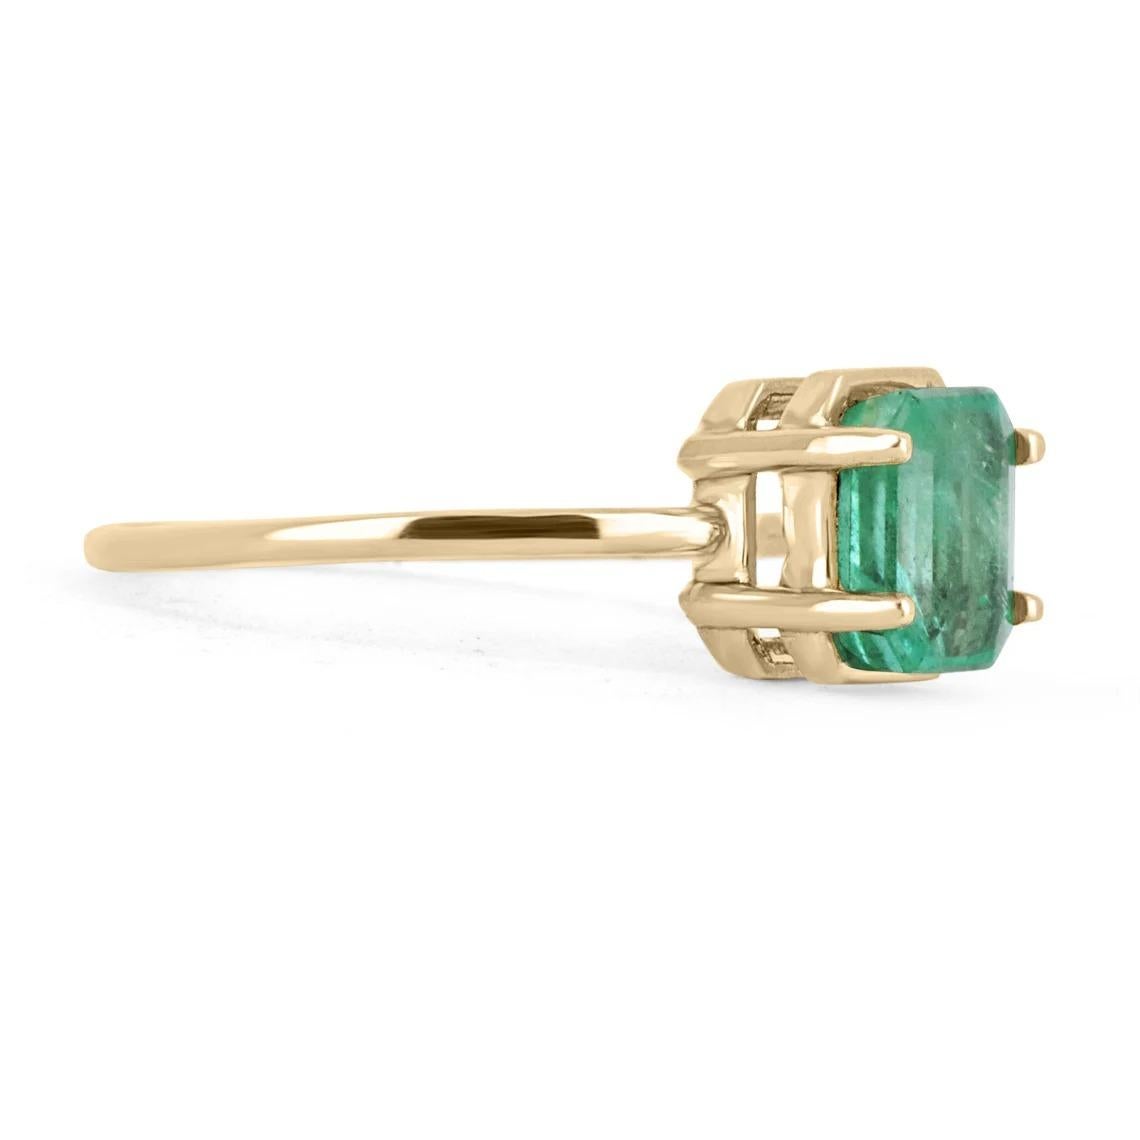 Displayed is a custom emerald solitaire emerald-cut ring in 14K yellow gold. This gorgeous solitaire ring carries a 1.20-carat emerald in a four-prong setting. The emerald has very good clarity with minor flaws that are normal in all genuine